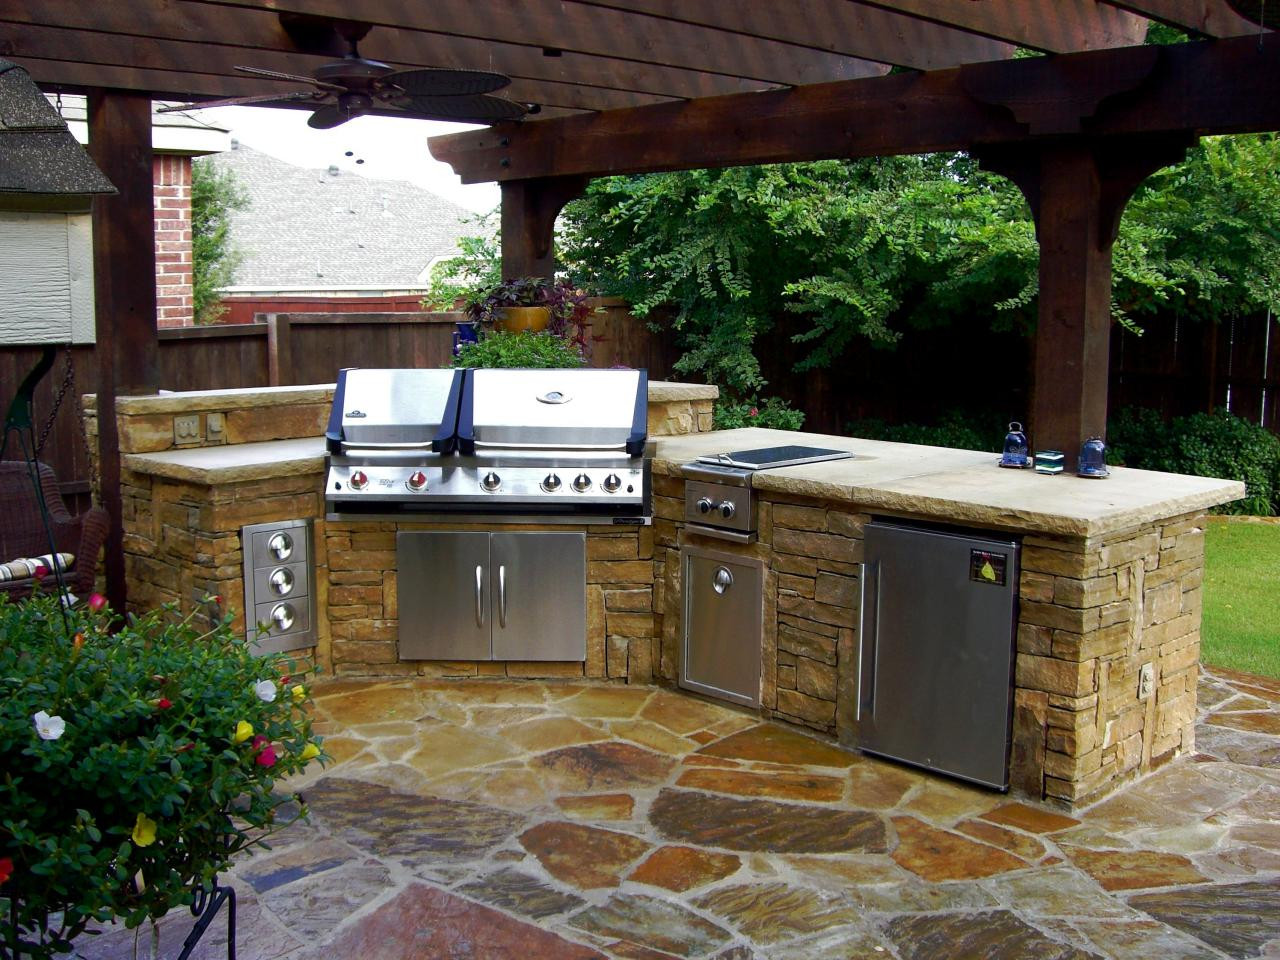 Outdoor Kitchen Plans Diy
 These DIY Outdoor Kitchen Plans Turn Your Backyard Into